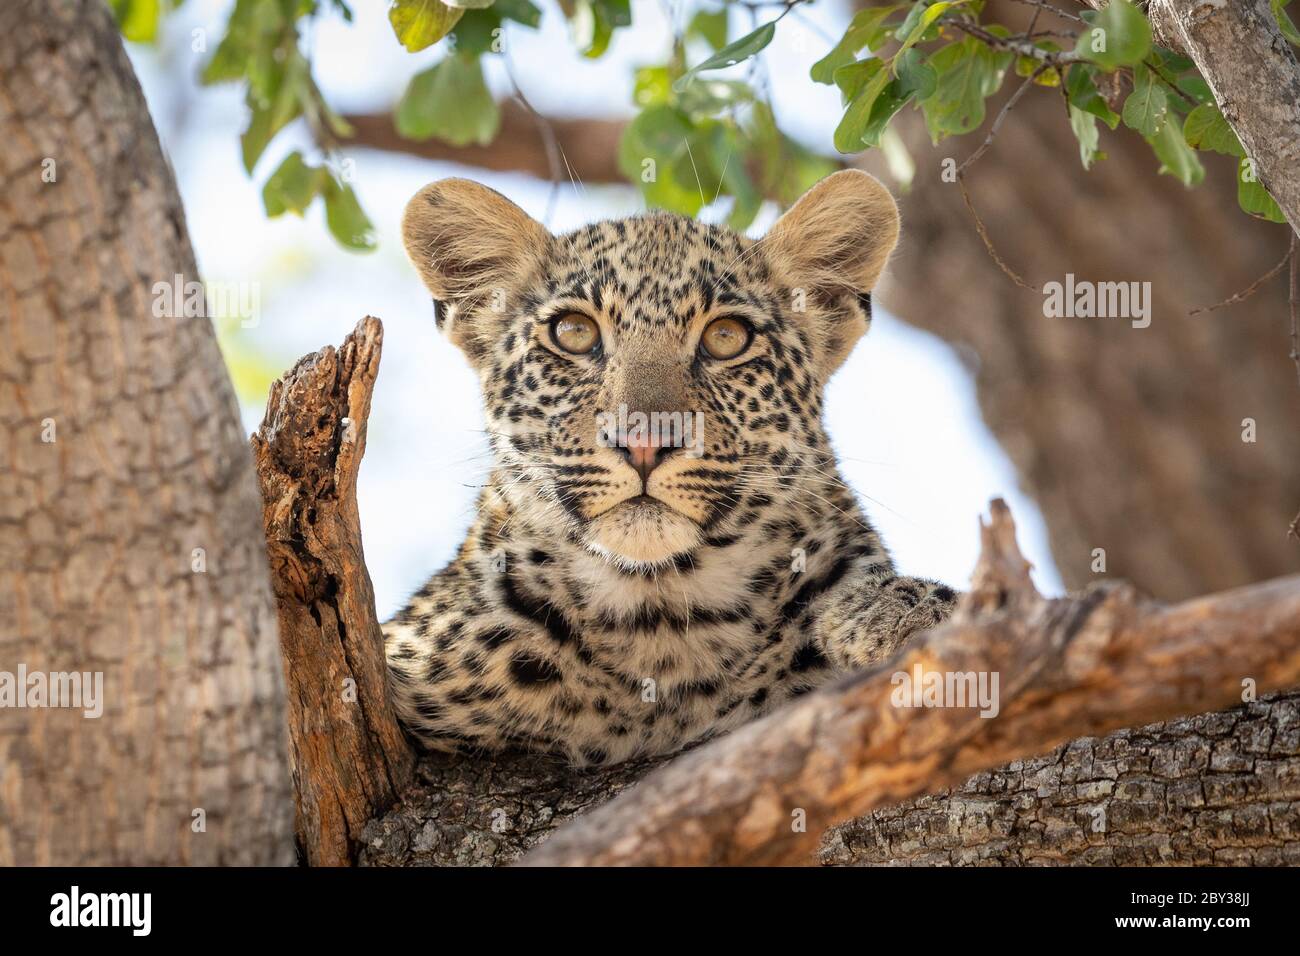 One baby leopard with big beautiful eyes resting in a tree with green leaves looking straight ahead in Kruger Park South Africa Stock Photo